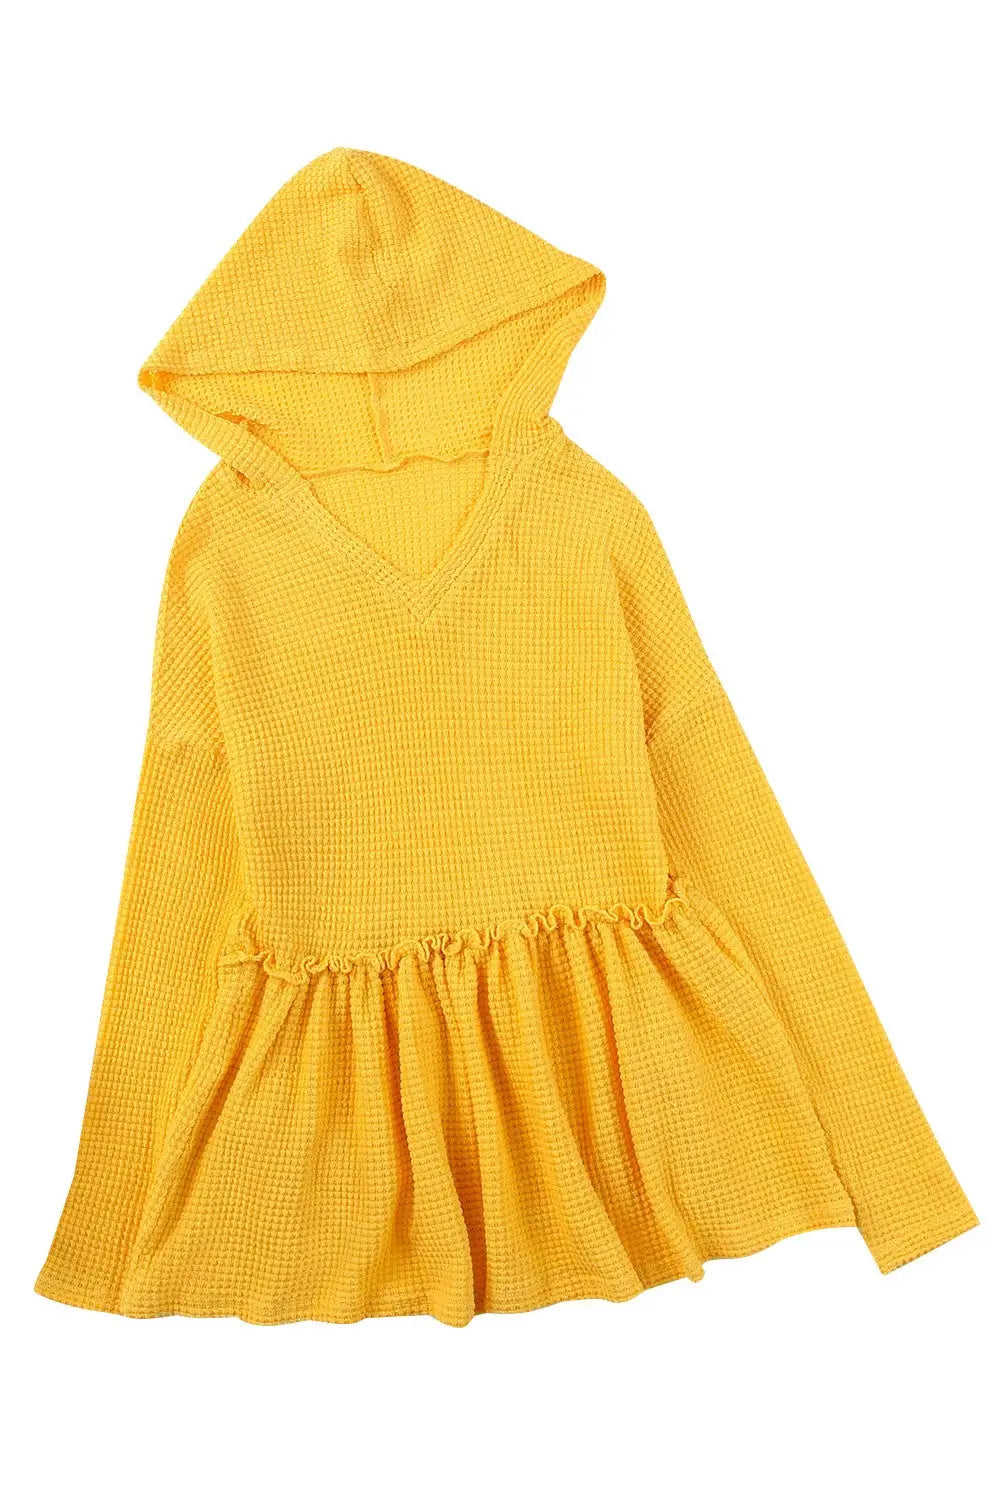 Yellow v neck drop shoulder hooded flowy top with frill - sweatshirts & hoodies